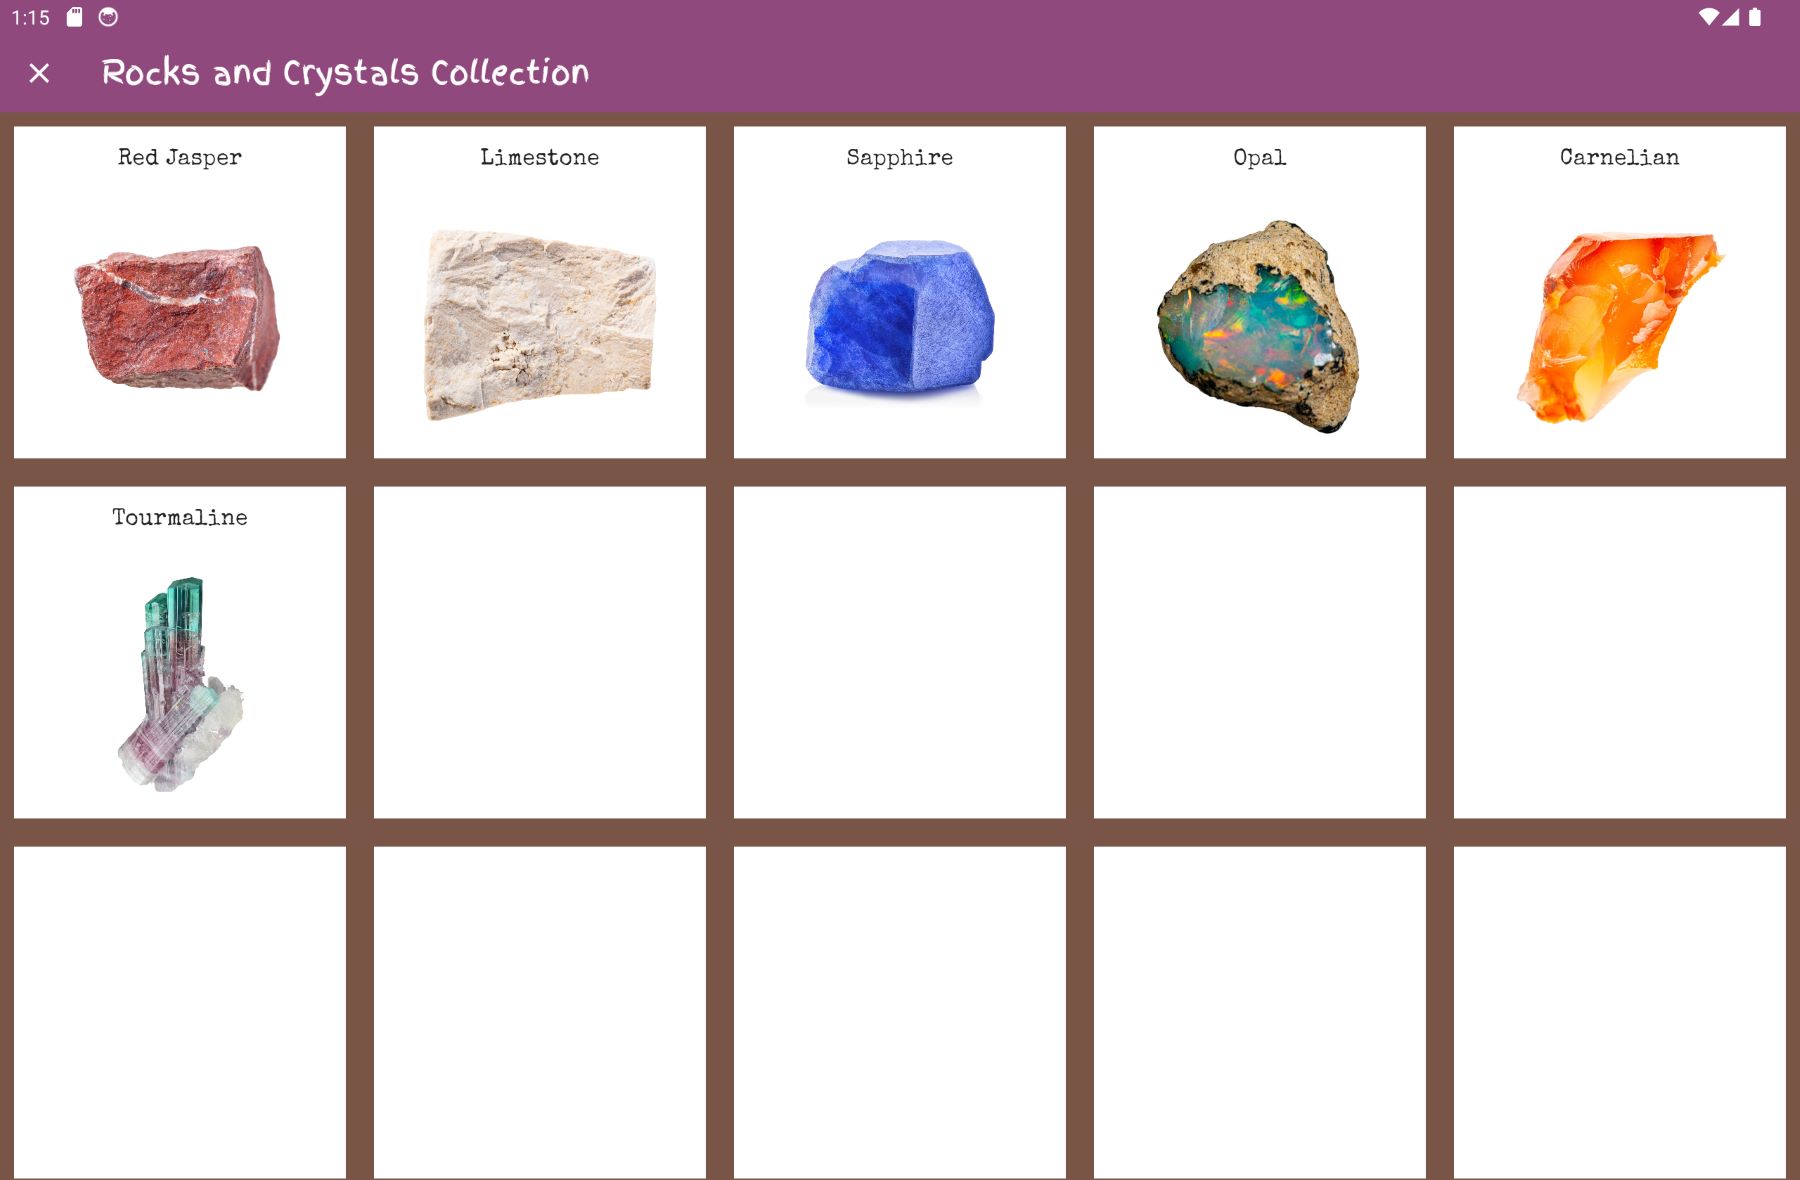 image of rocks and crystals collection screen